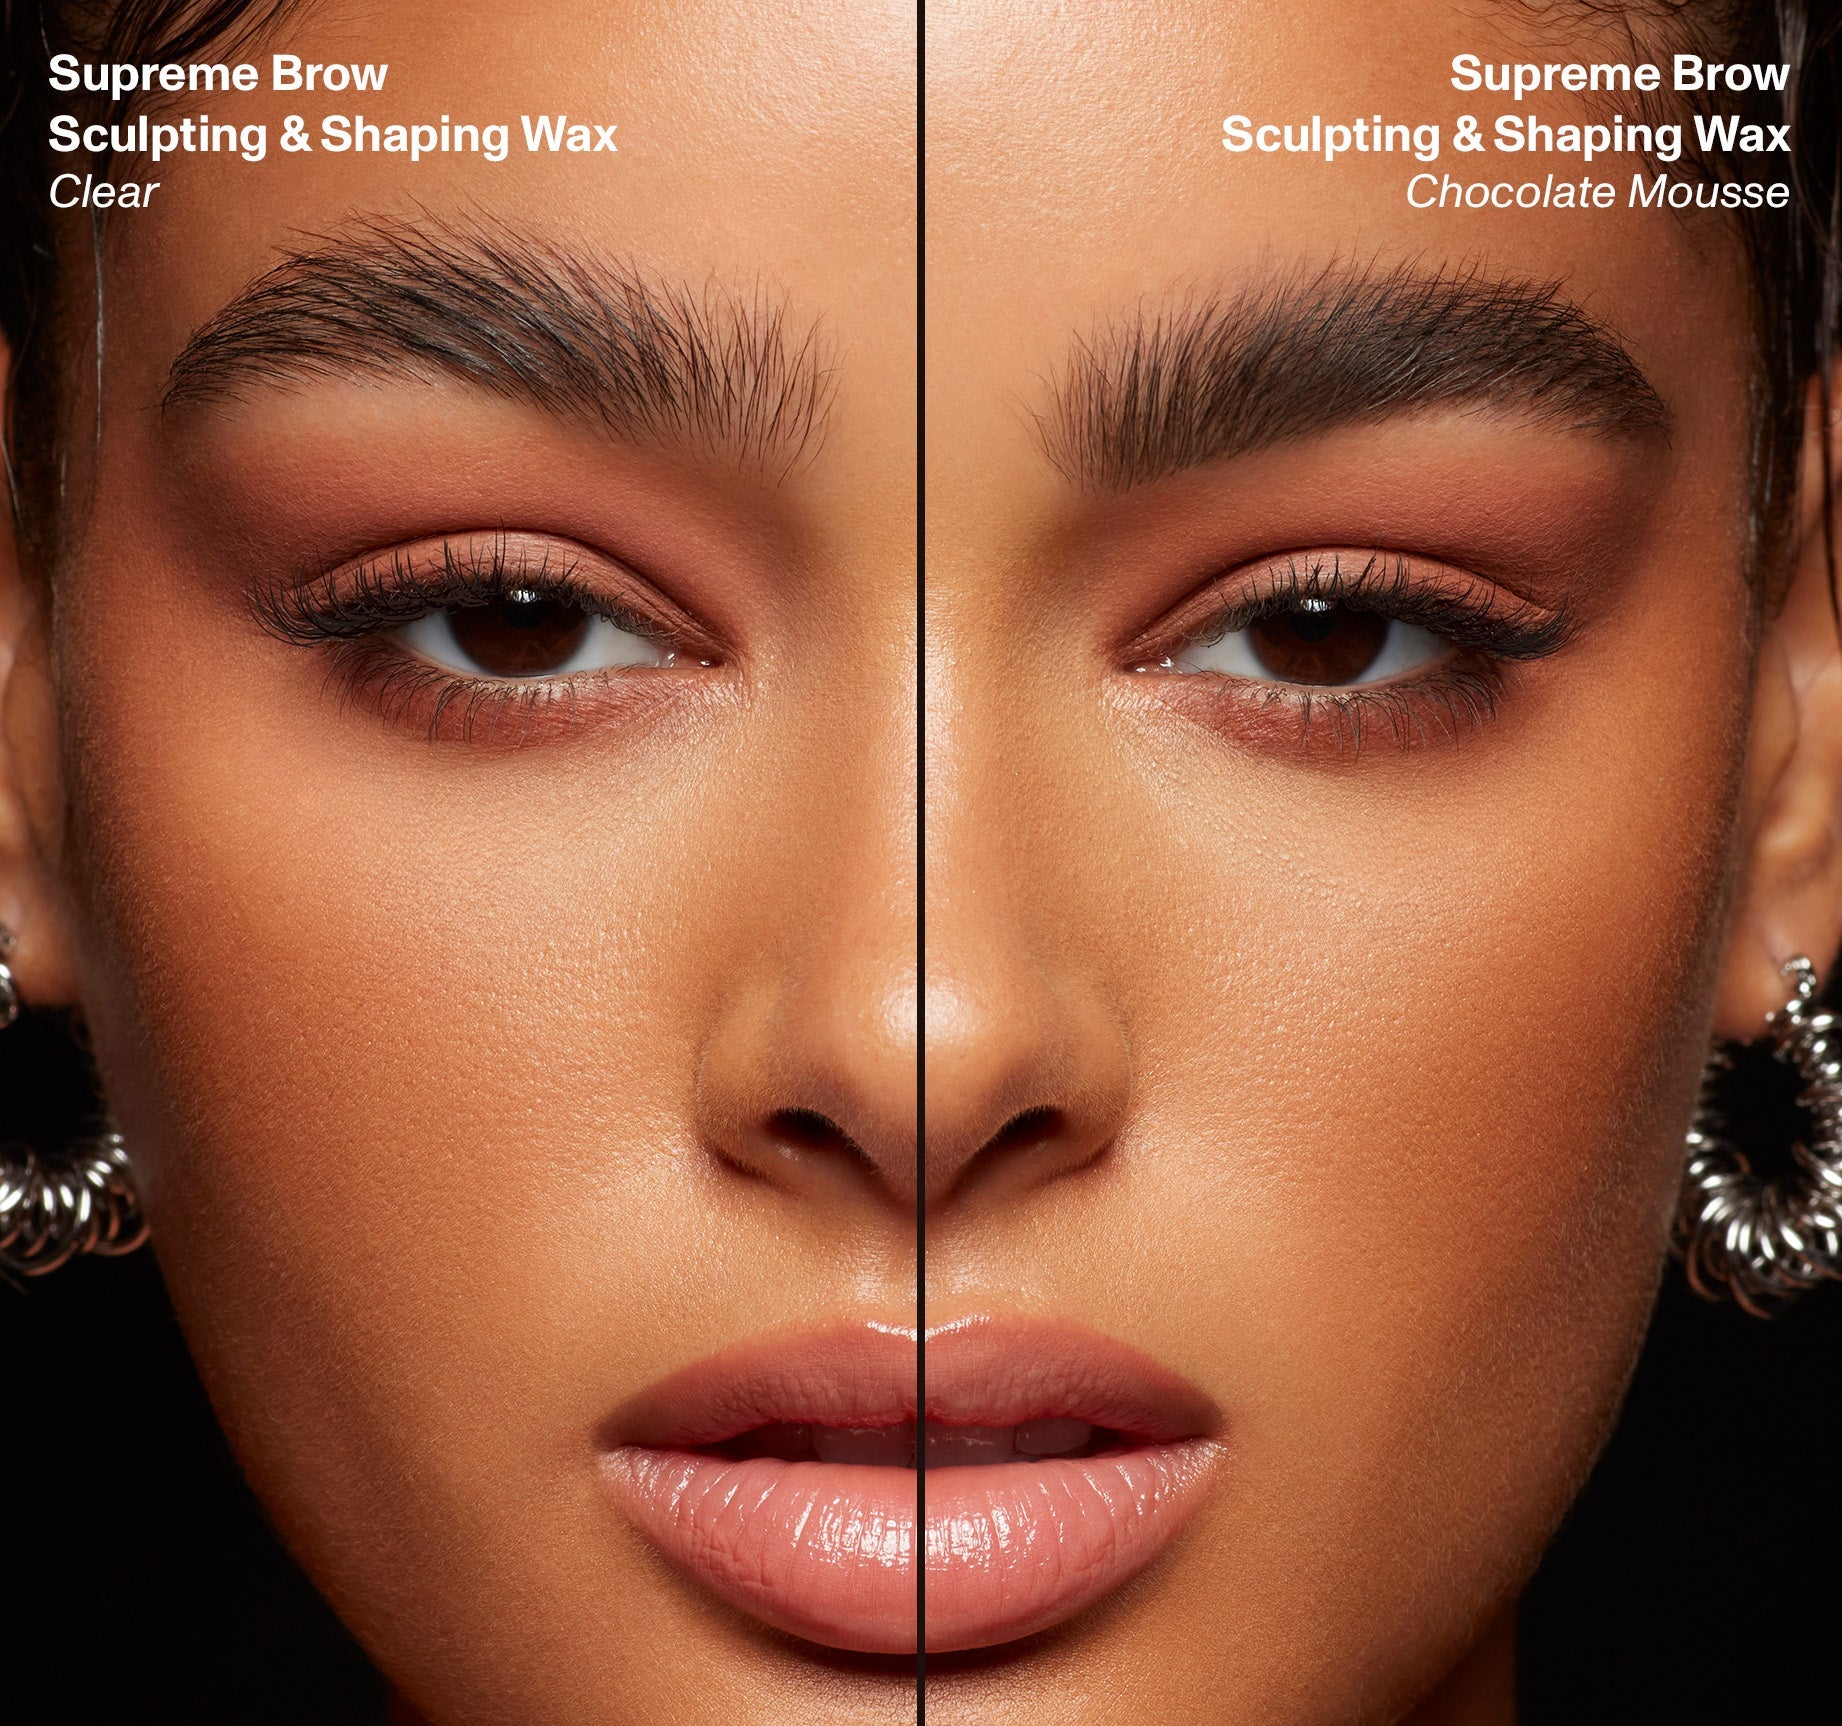 Supreme Brow Sculpting and Shaping Wax - Clear - Image 6